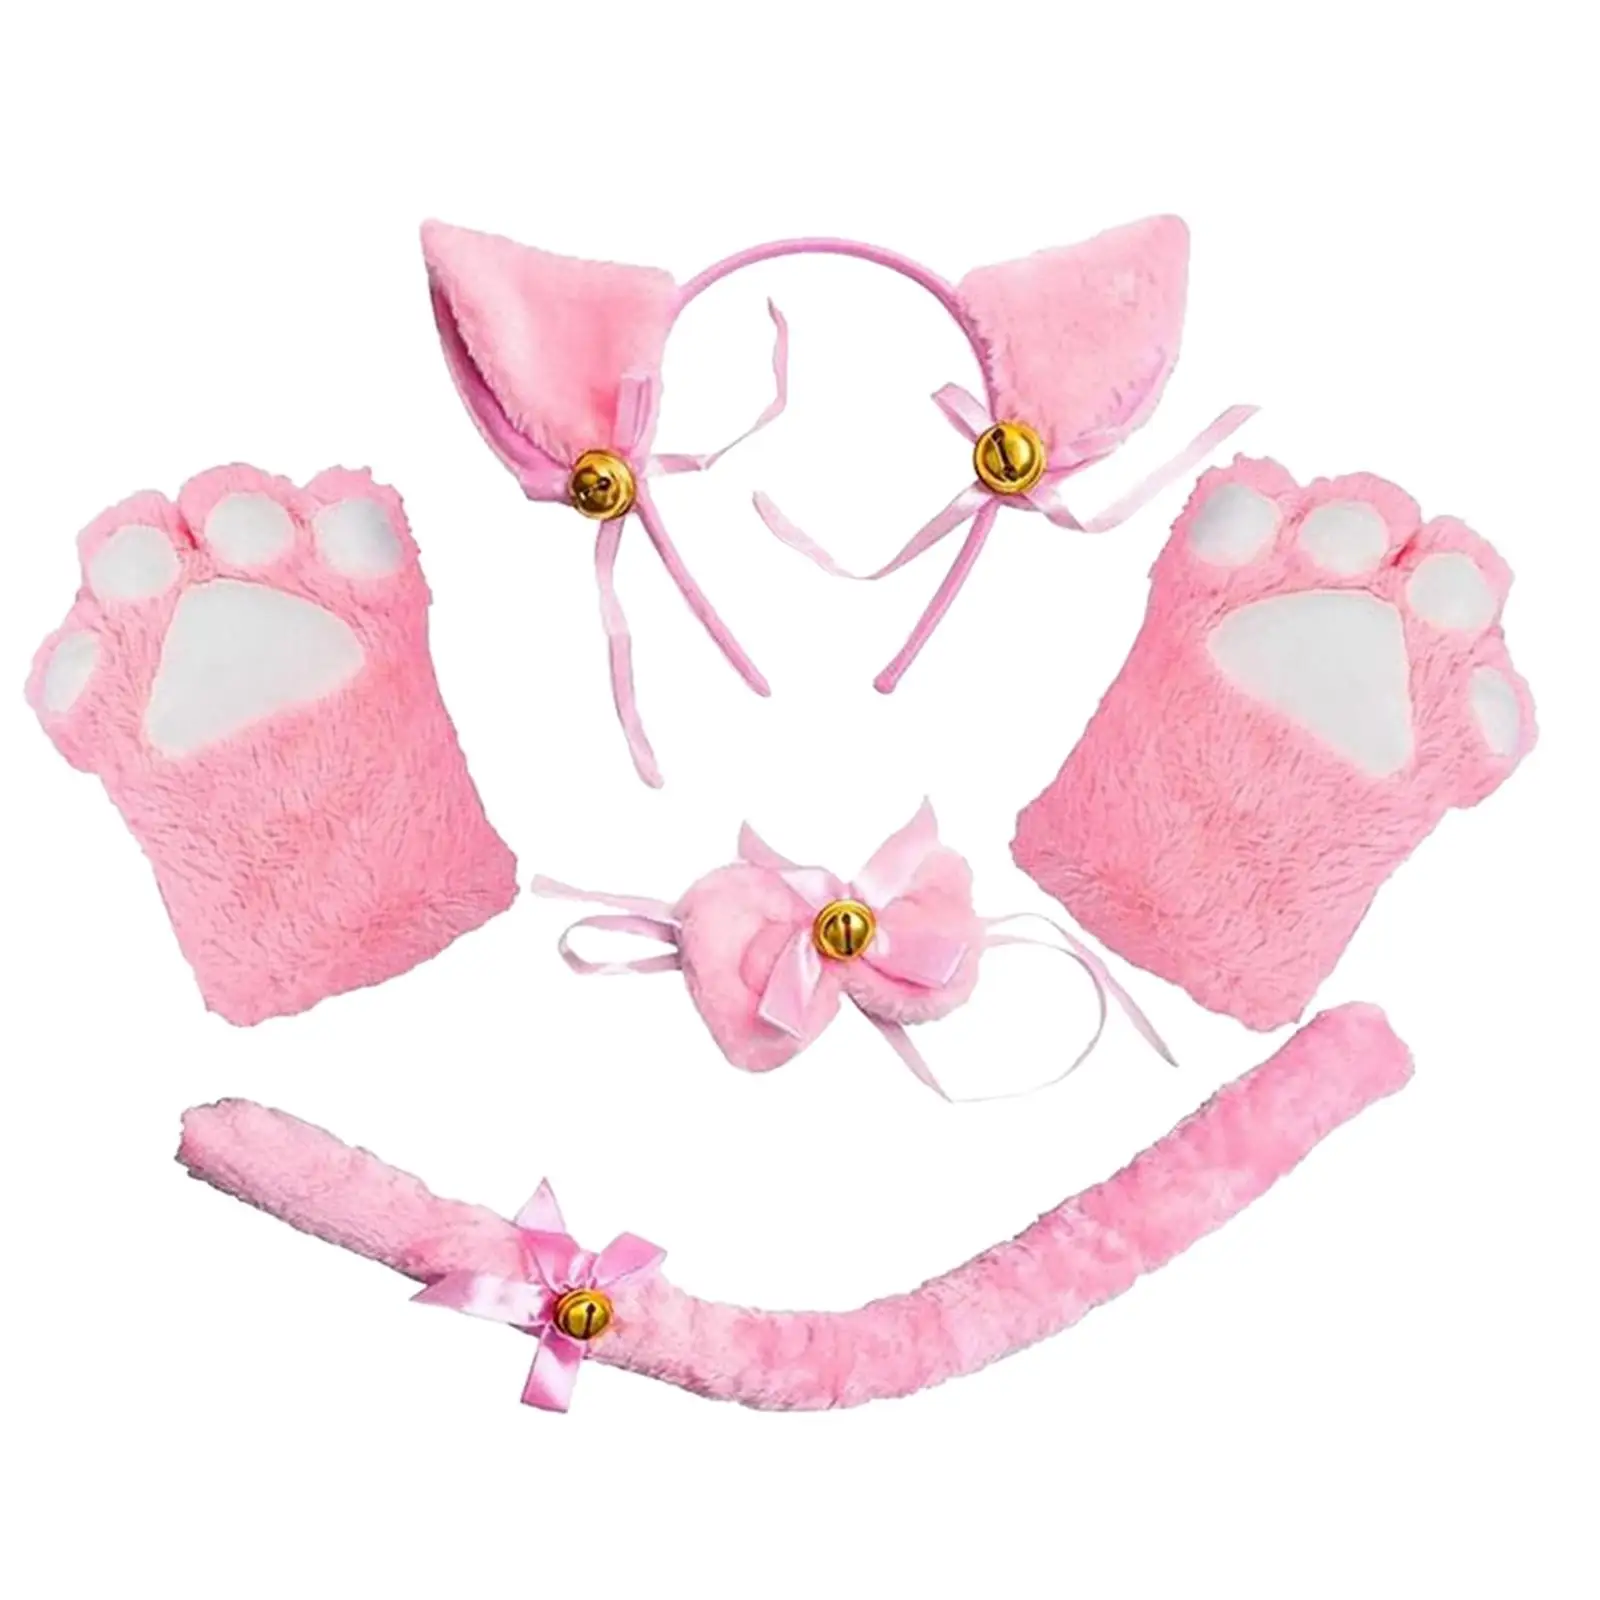 Anime Cat Costume Cosplay Kitten Bow Tie Gloves Toys Accessories Props Headwear for Gifts Dress up Halloween Children Adults